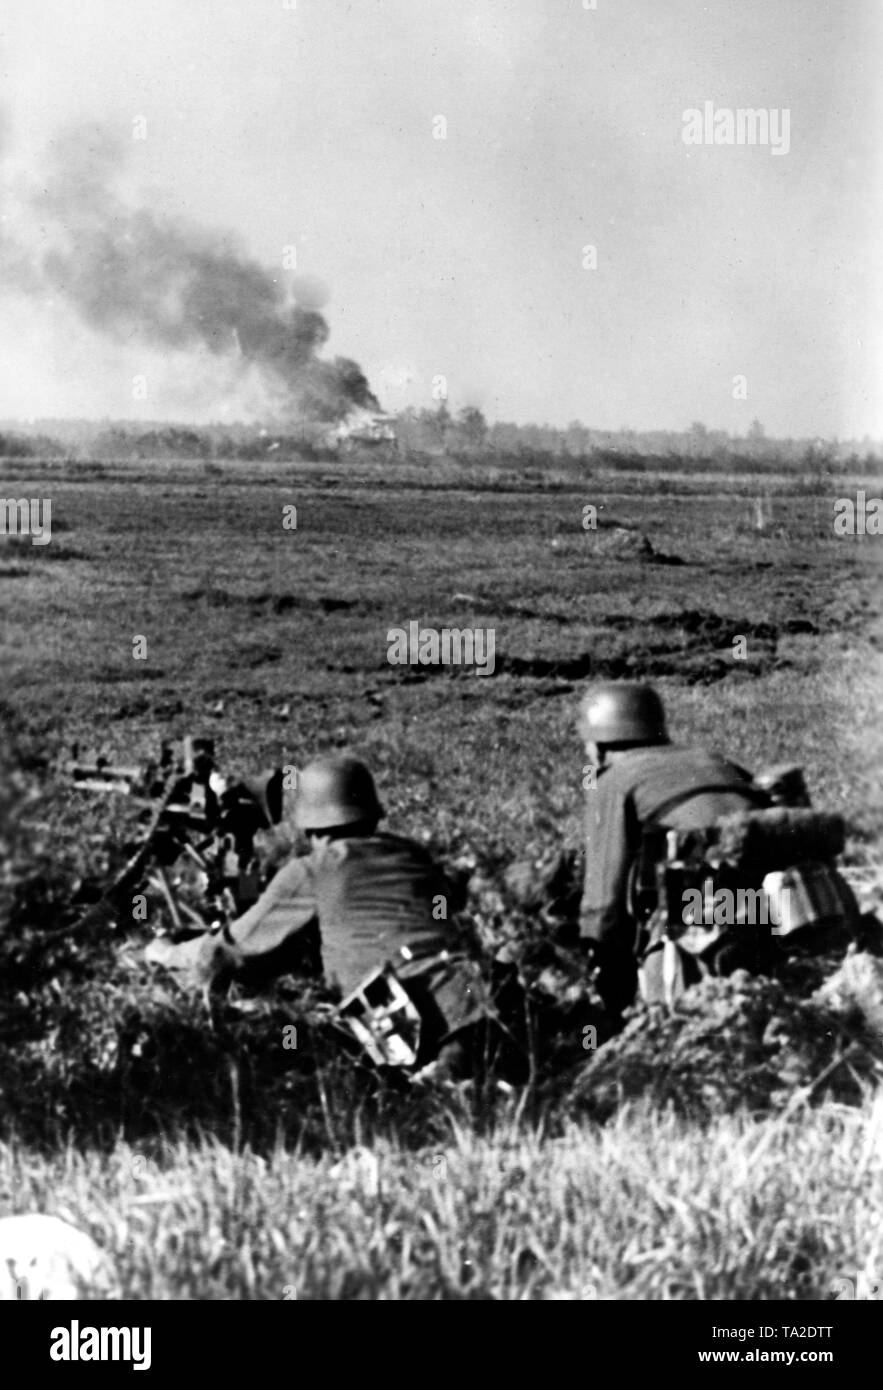 German infantrymen fighting the Soviet forces on the Donets front. They have entrenched themselves and fired with a machine gun 34th War correspondent: Ebert. Stock Photo